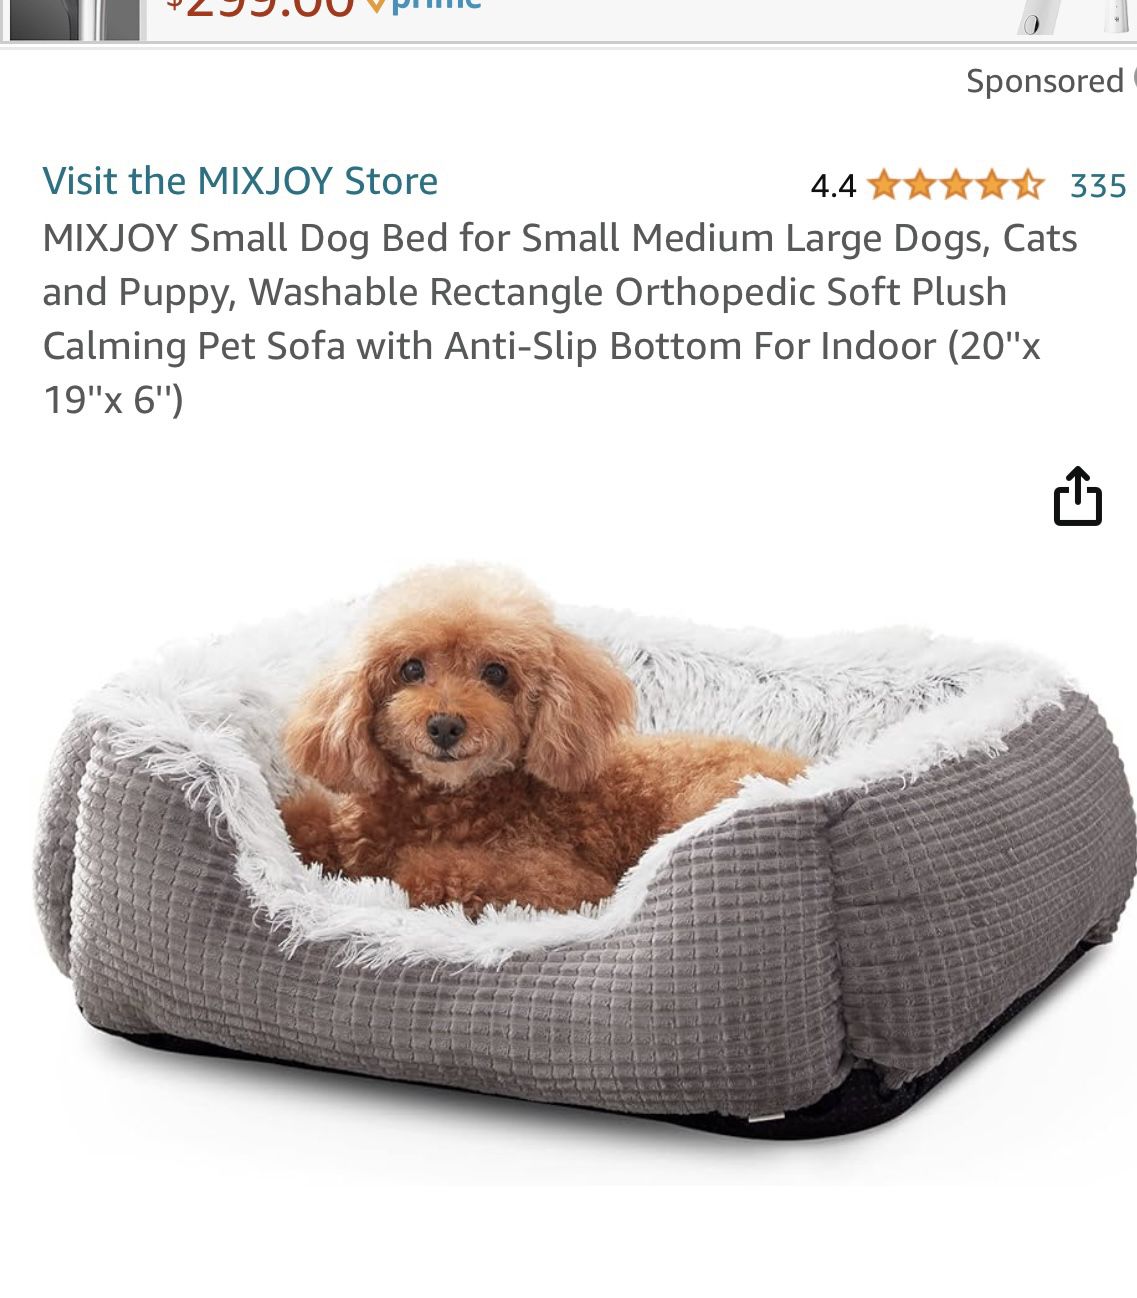 Small Dog Bed 